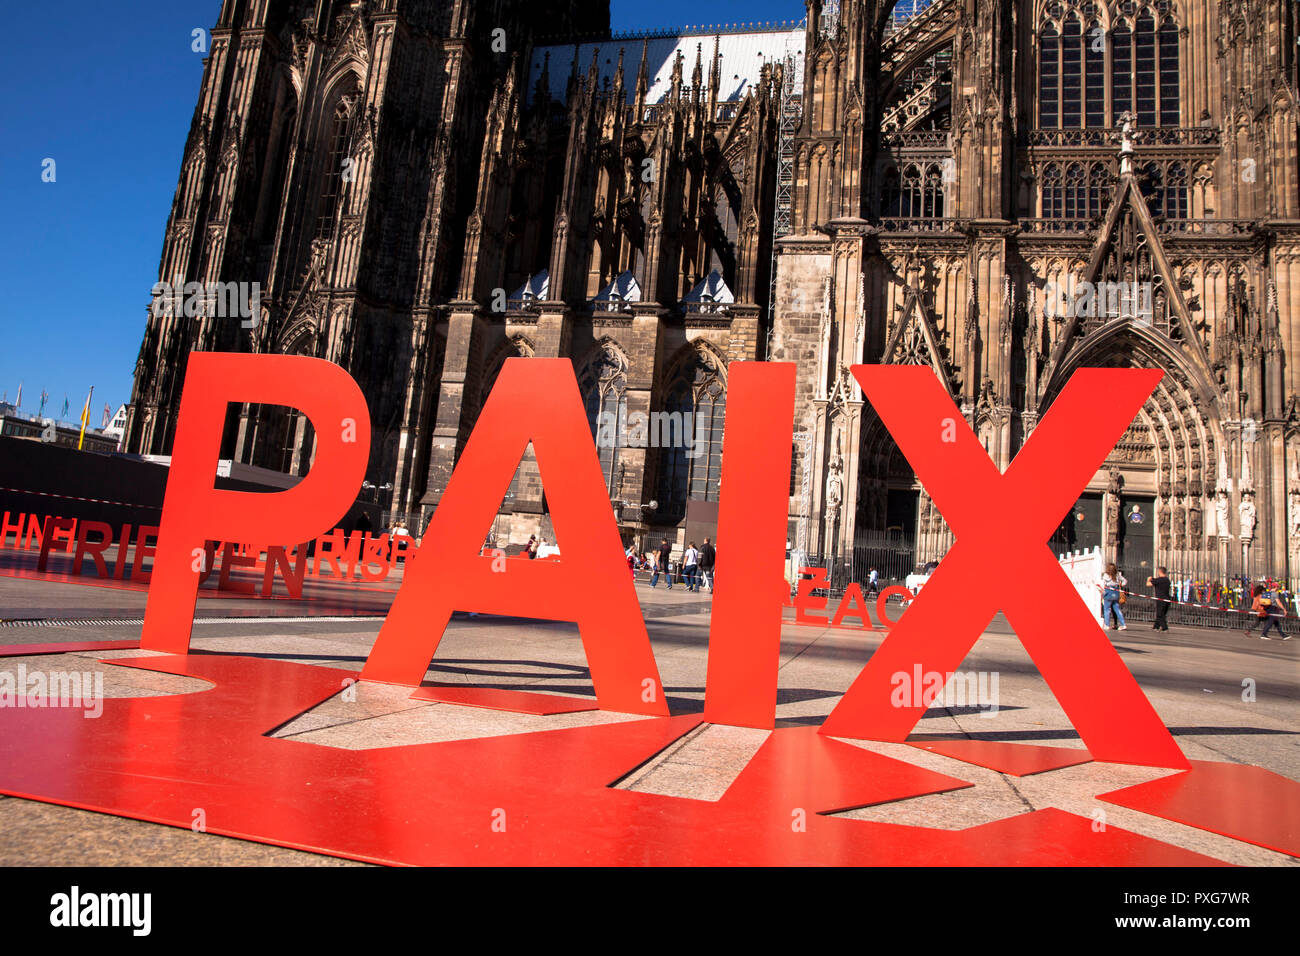 word sculptures in front of the cathedral during the cathedral pilgrimage 2018, the sculptures show the word peace in 12 languages, Cologne, Germany.  Stock Photo